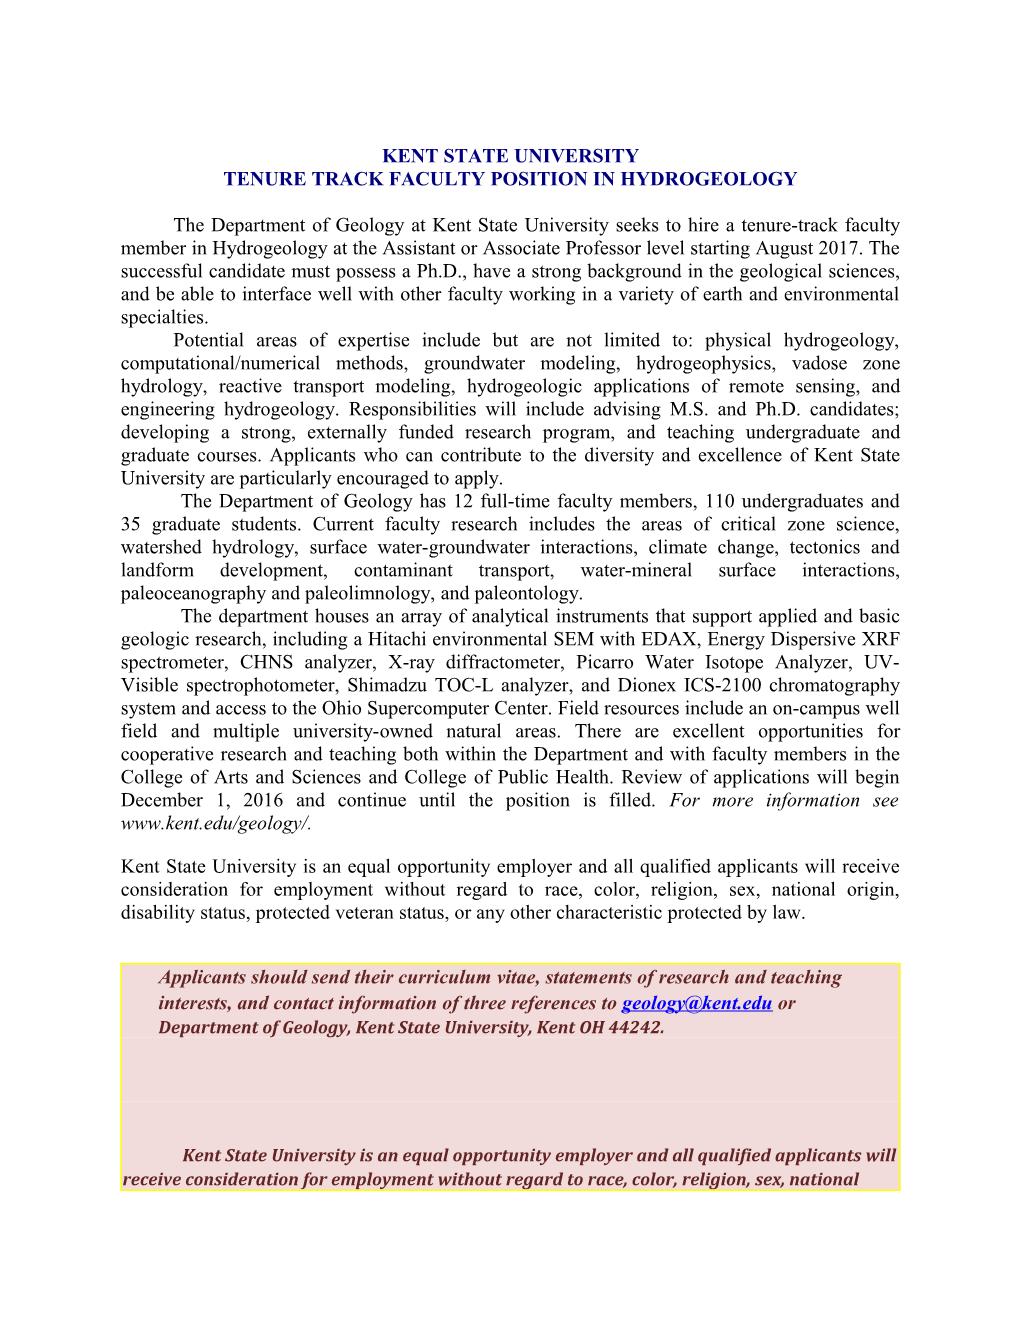 Tenure Track Faculty Position in Hydrogeology